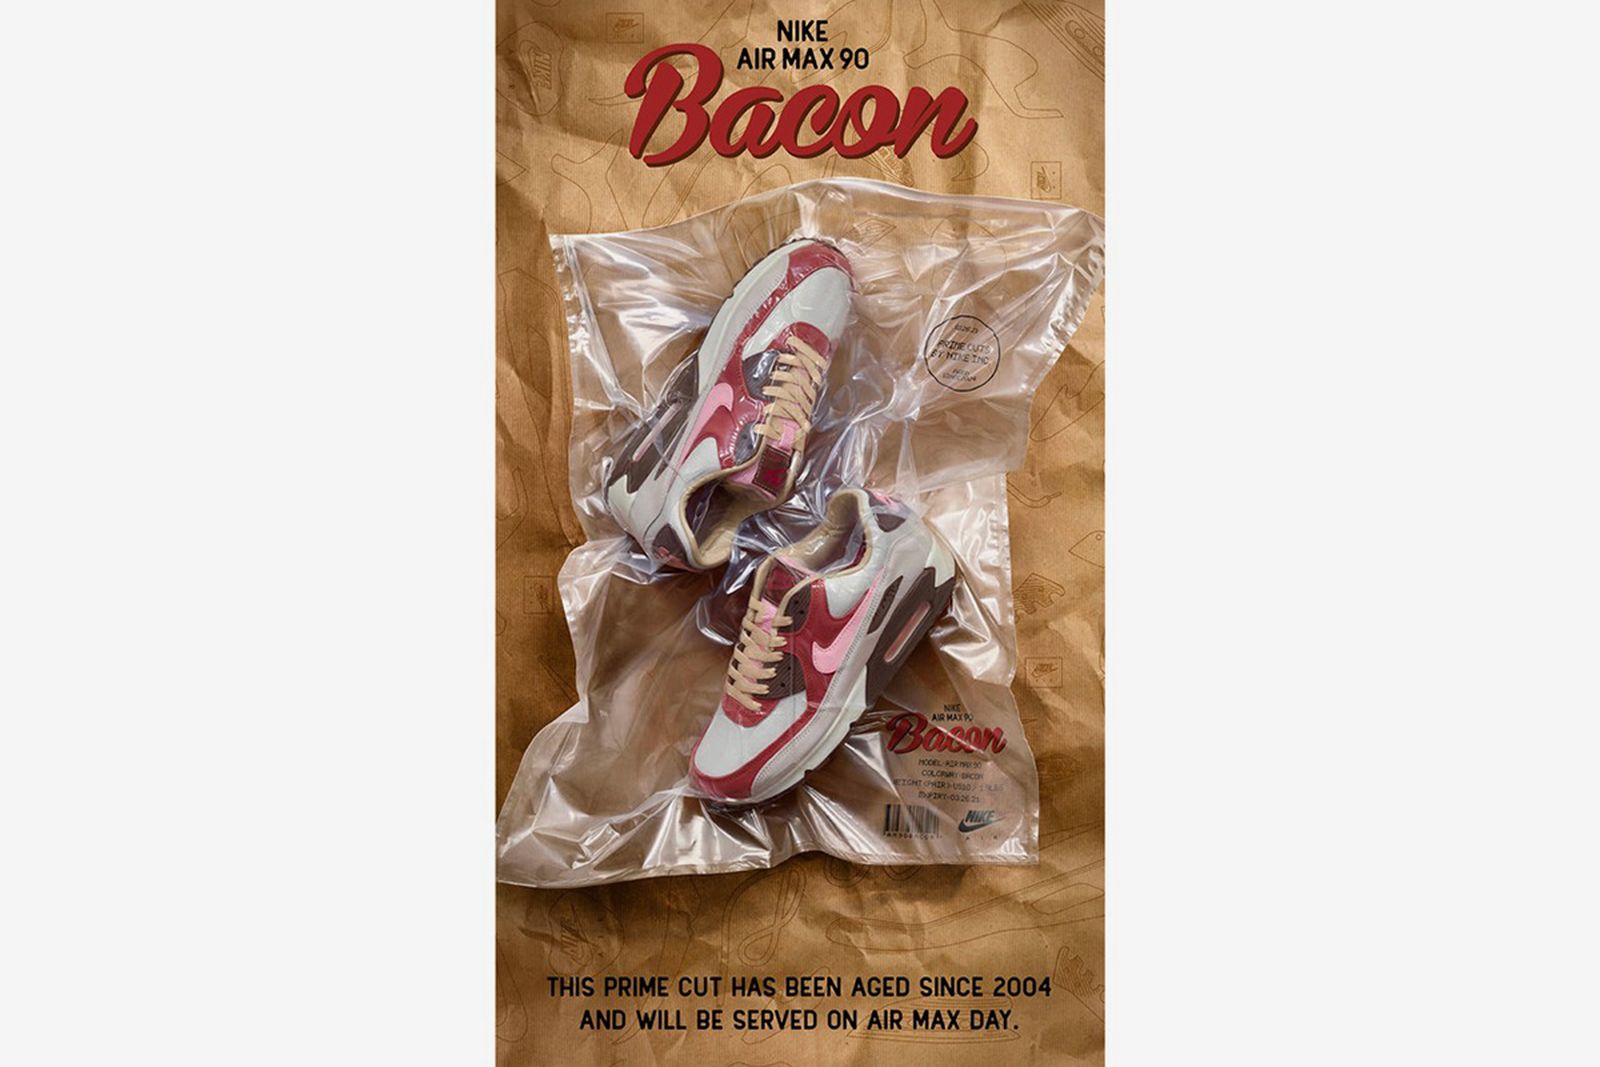 nike-air-max-90-bacon-2021-release-info-01